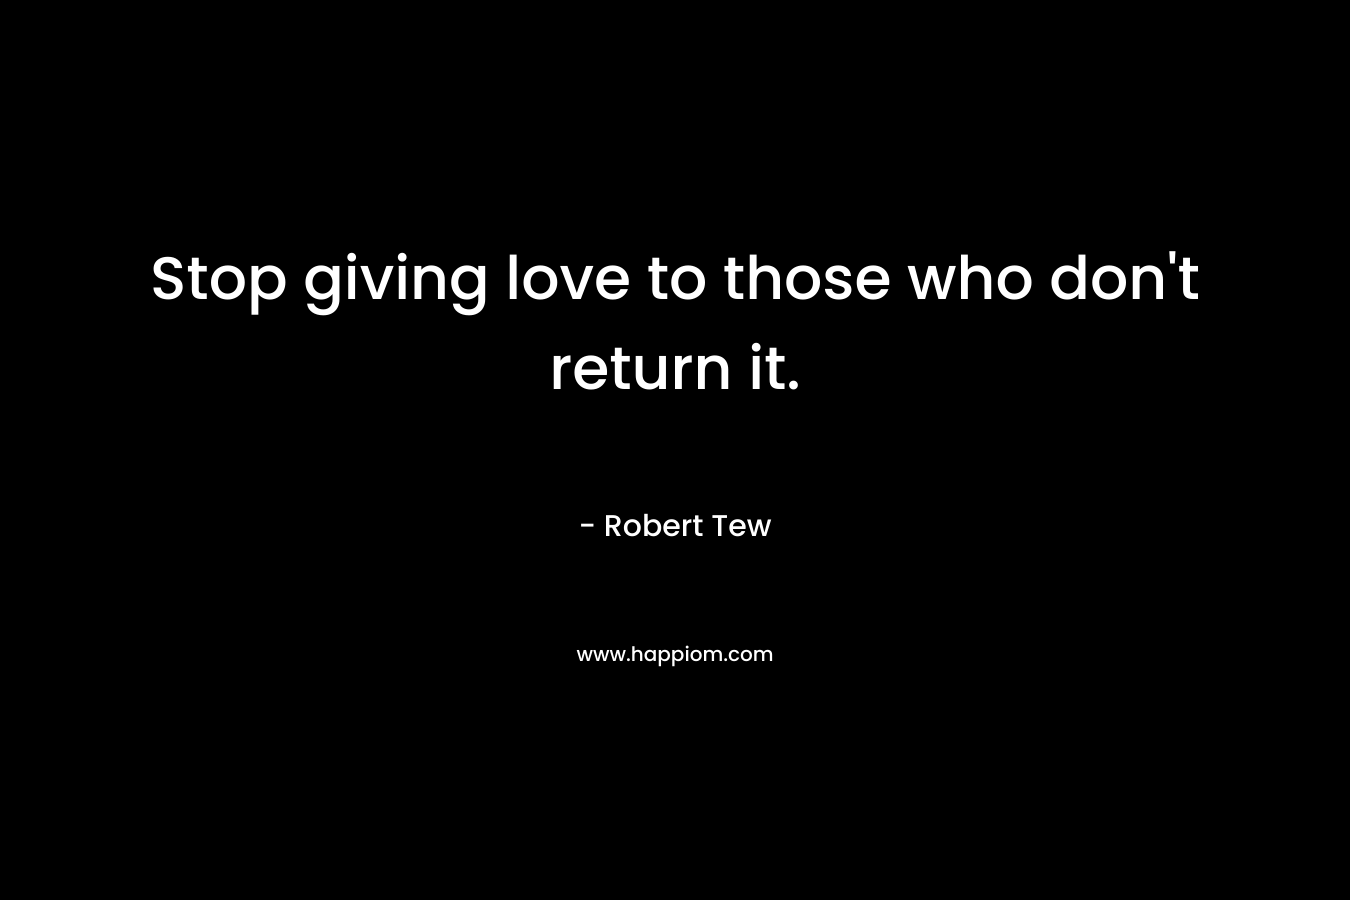 Stop giving love to those who don’t return it. – Robert Tew